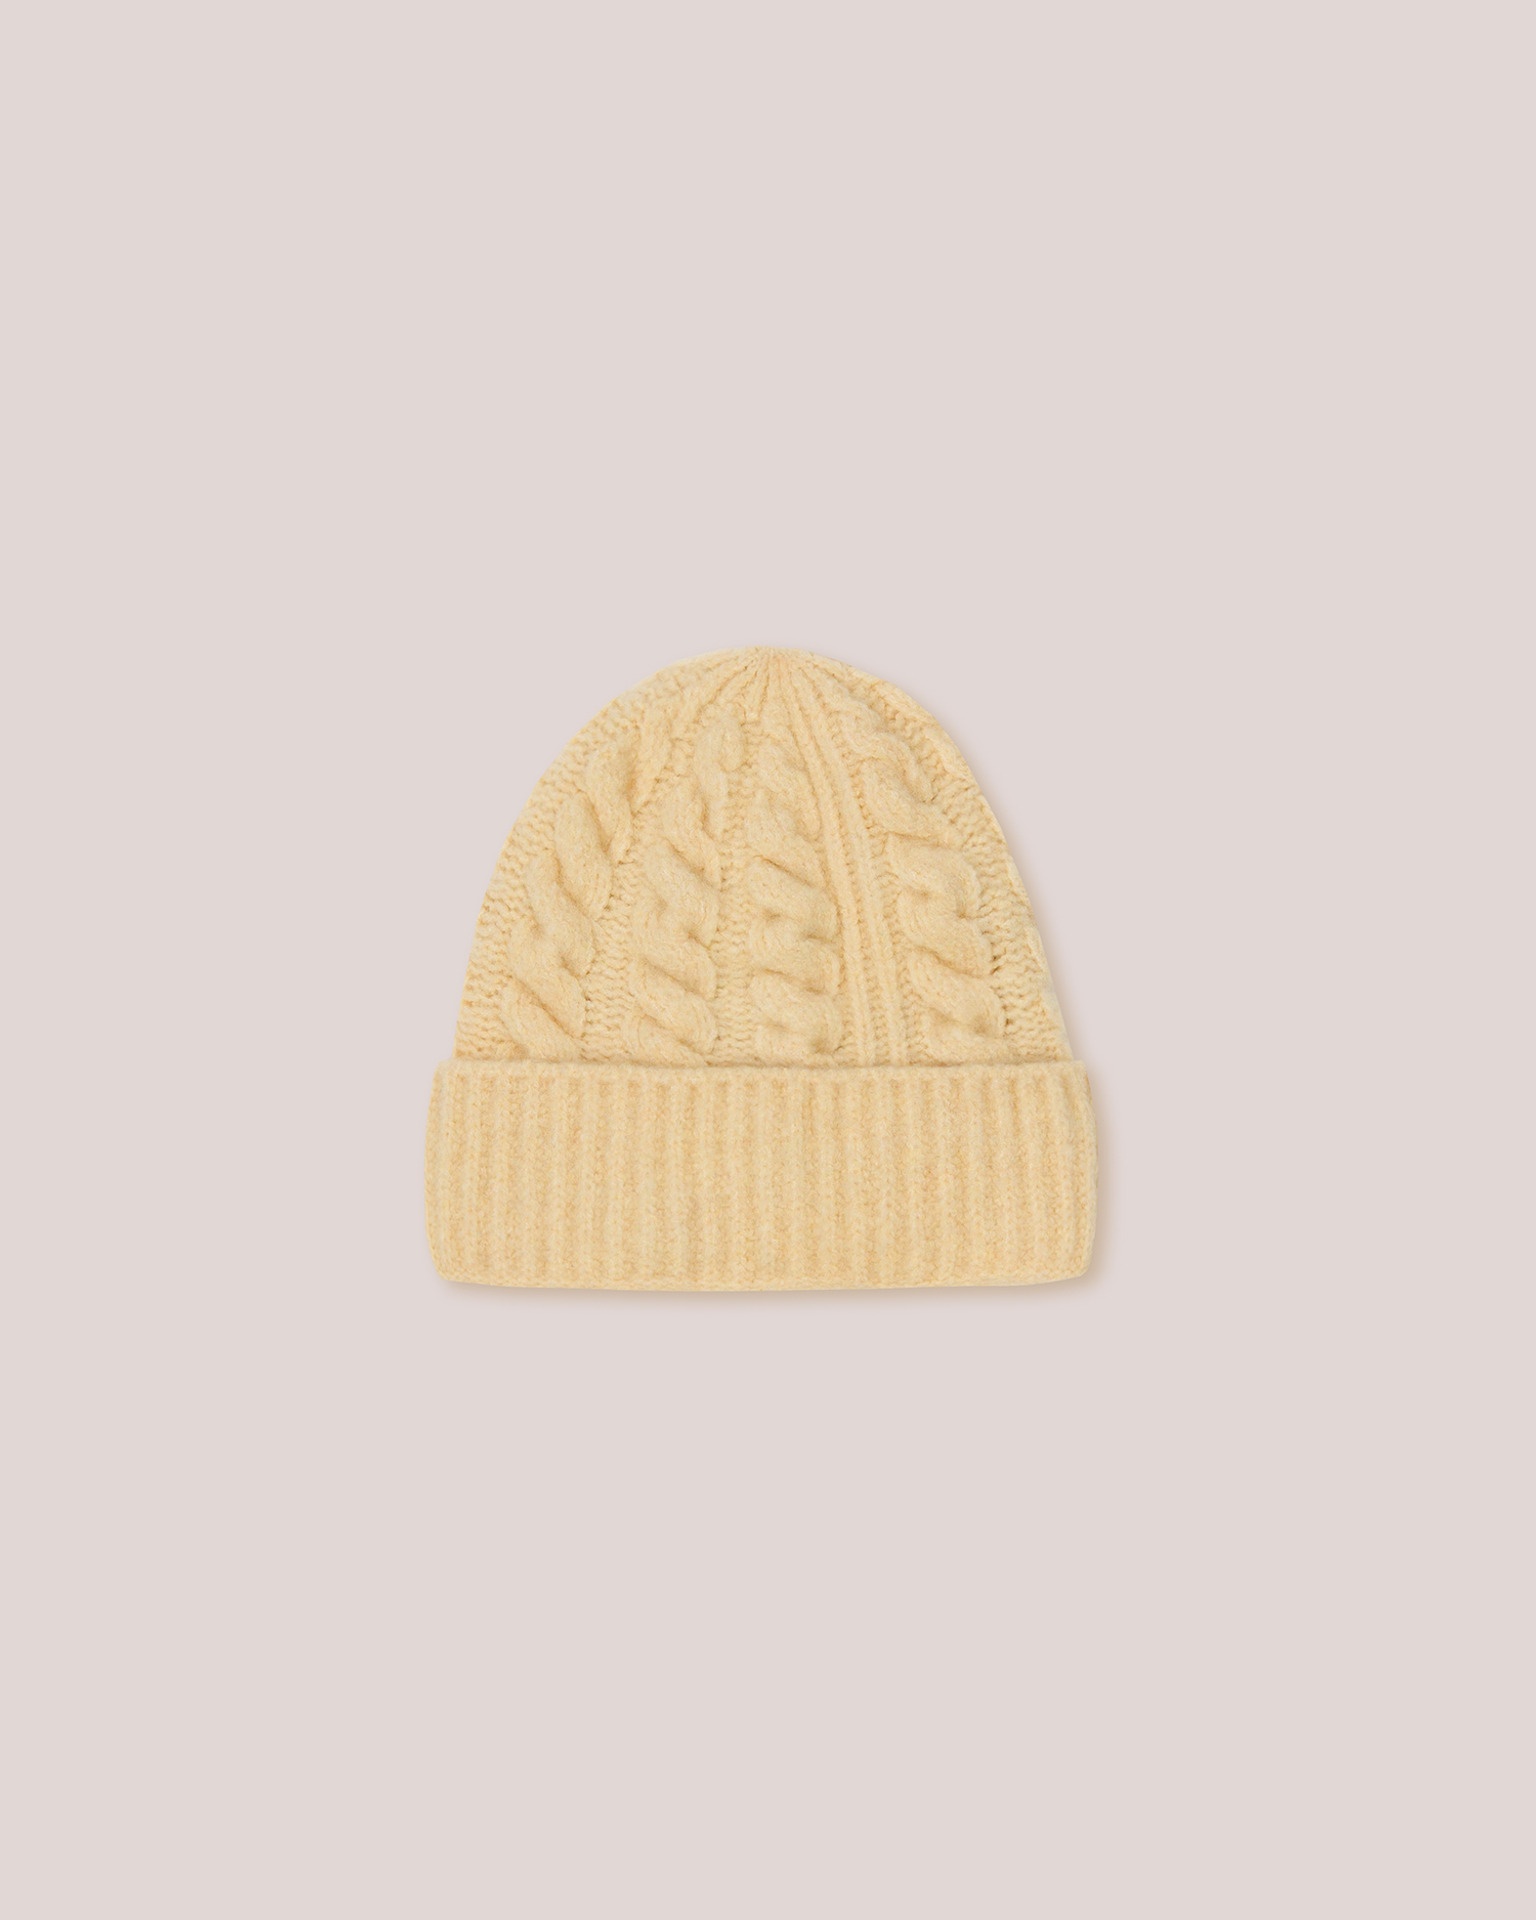 CLIVE - Cashmere hat - Pale yellow - 1